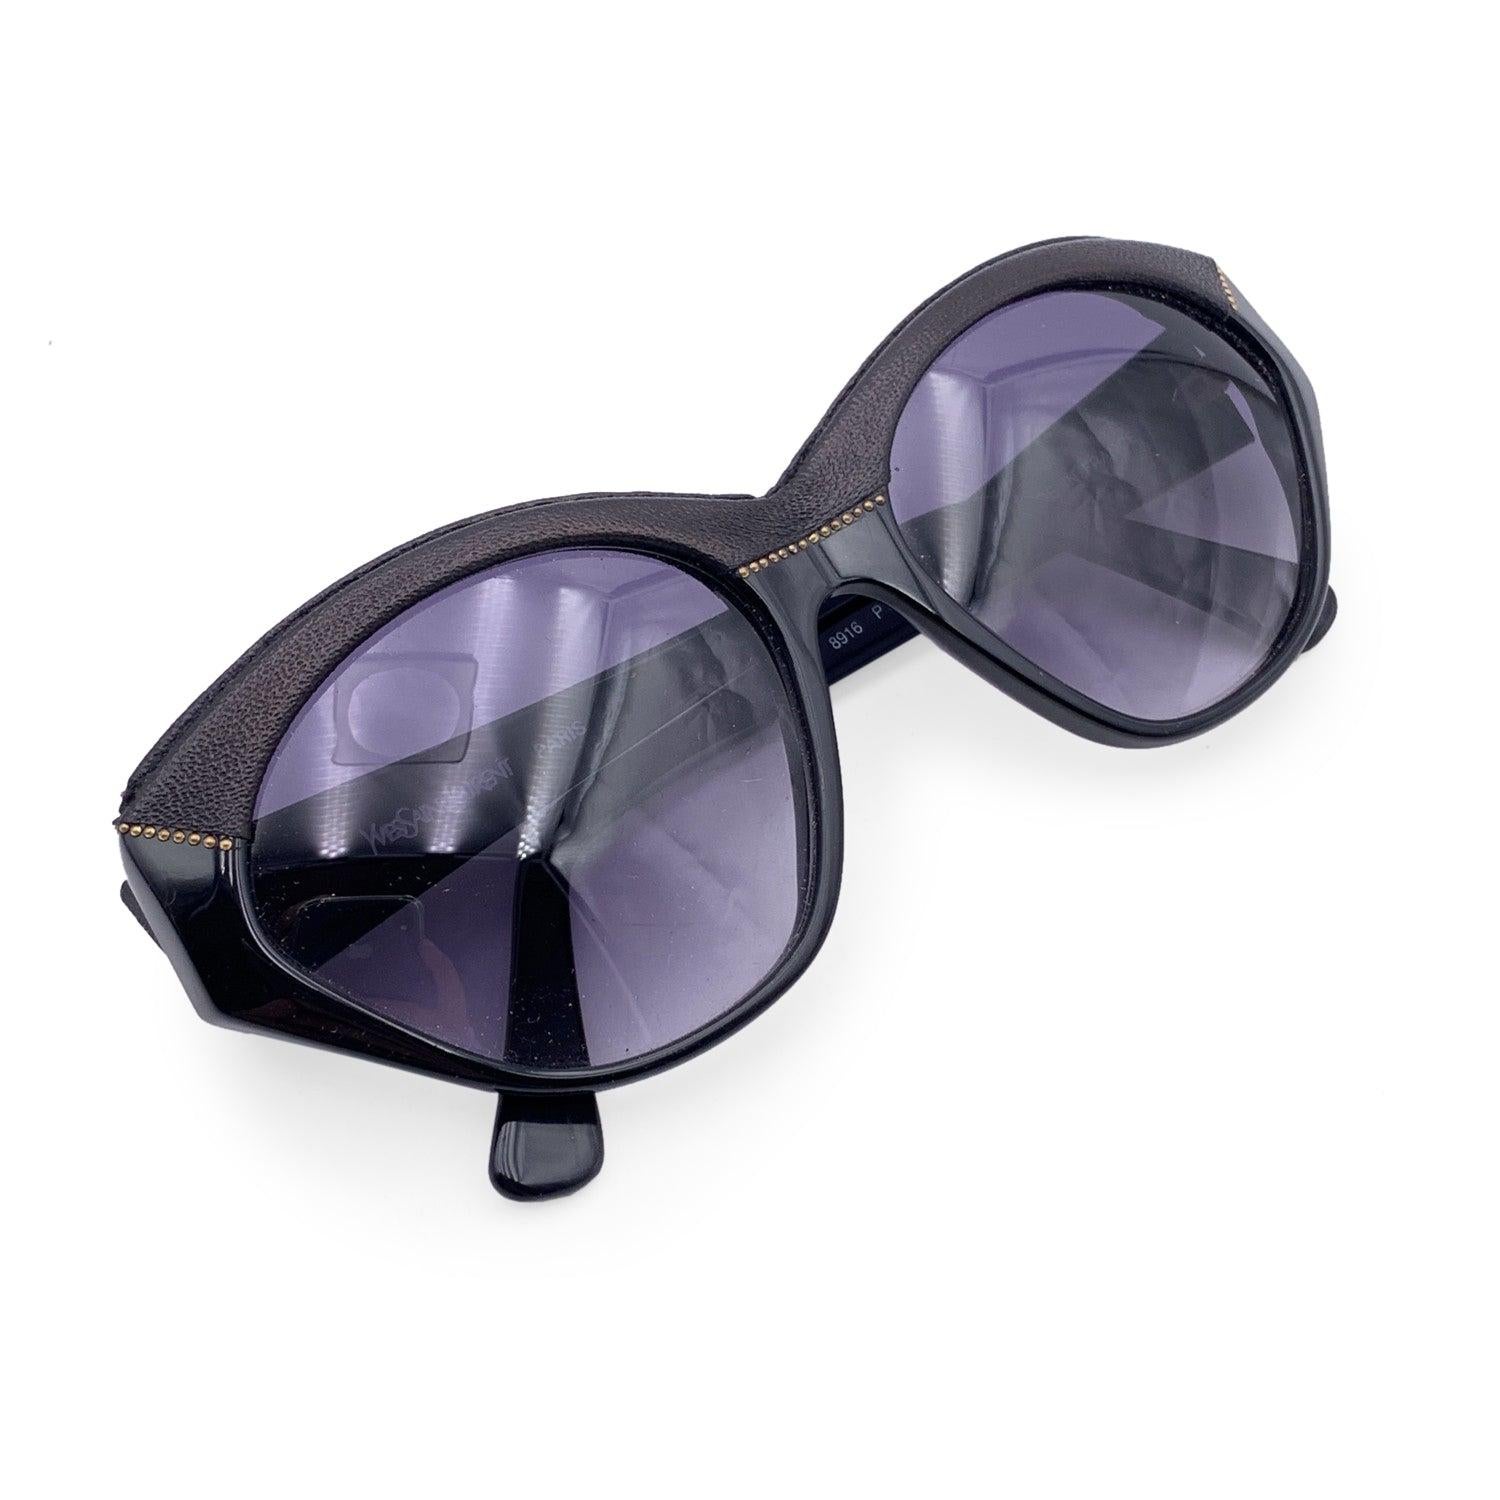 Vintage sunglasses by YVES SAINT LAURENT from the 80s, Mod. 8916 P367. Black acetate frame with gold metal accents. The upper part of the frame is covered with black leather. Hand-Made in France. Logos on the side. New 100% UV protection gradient